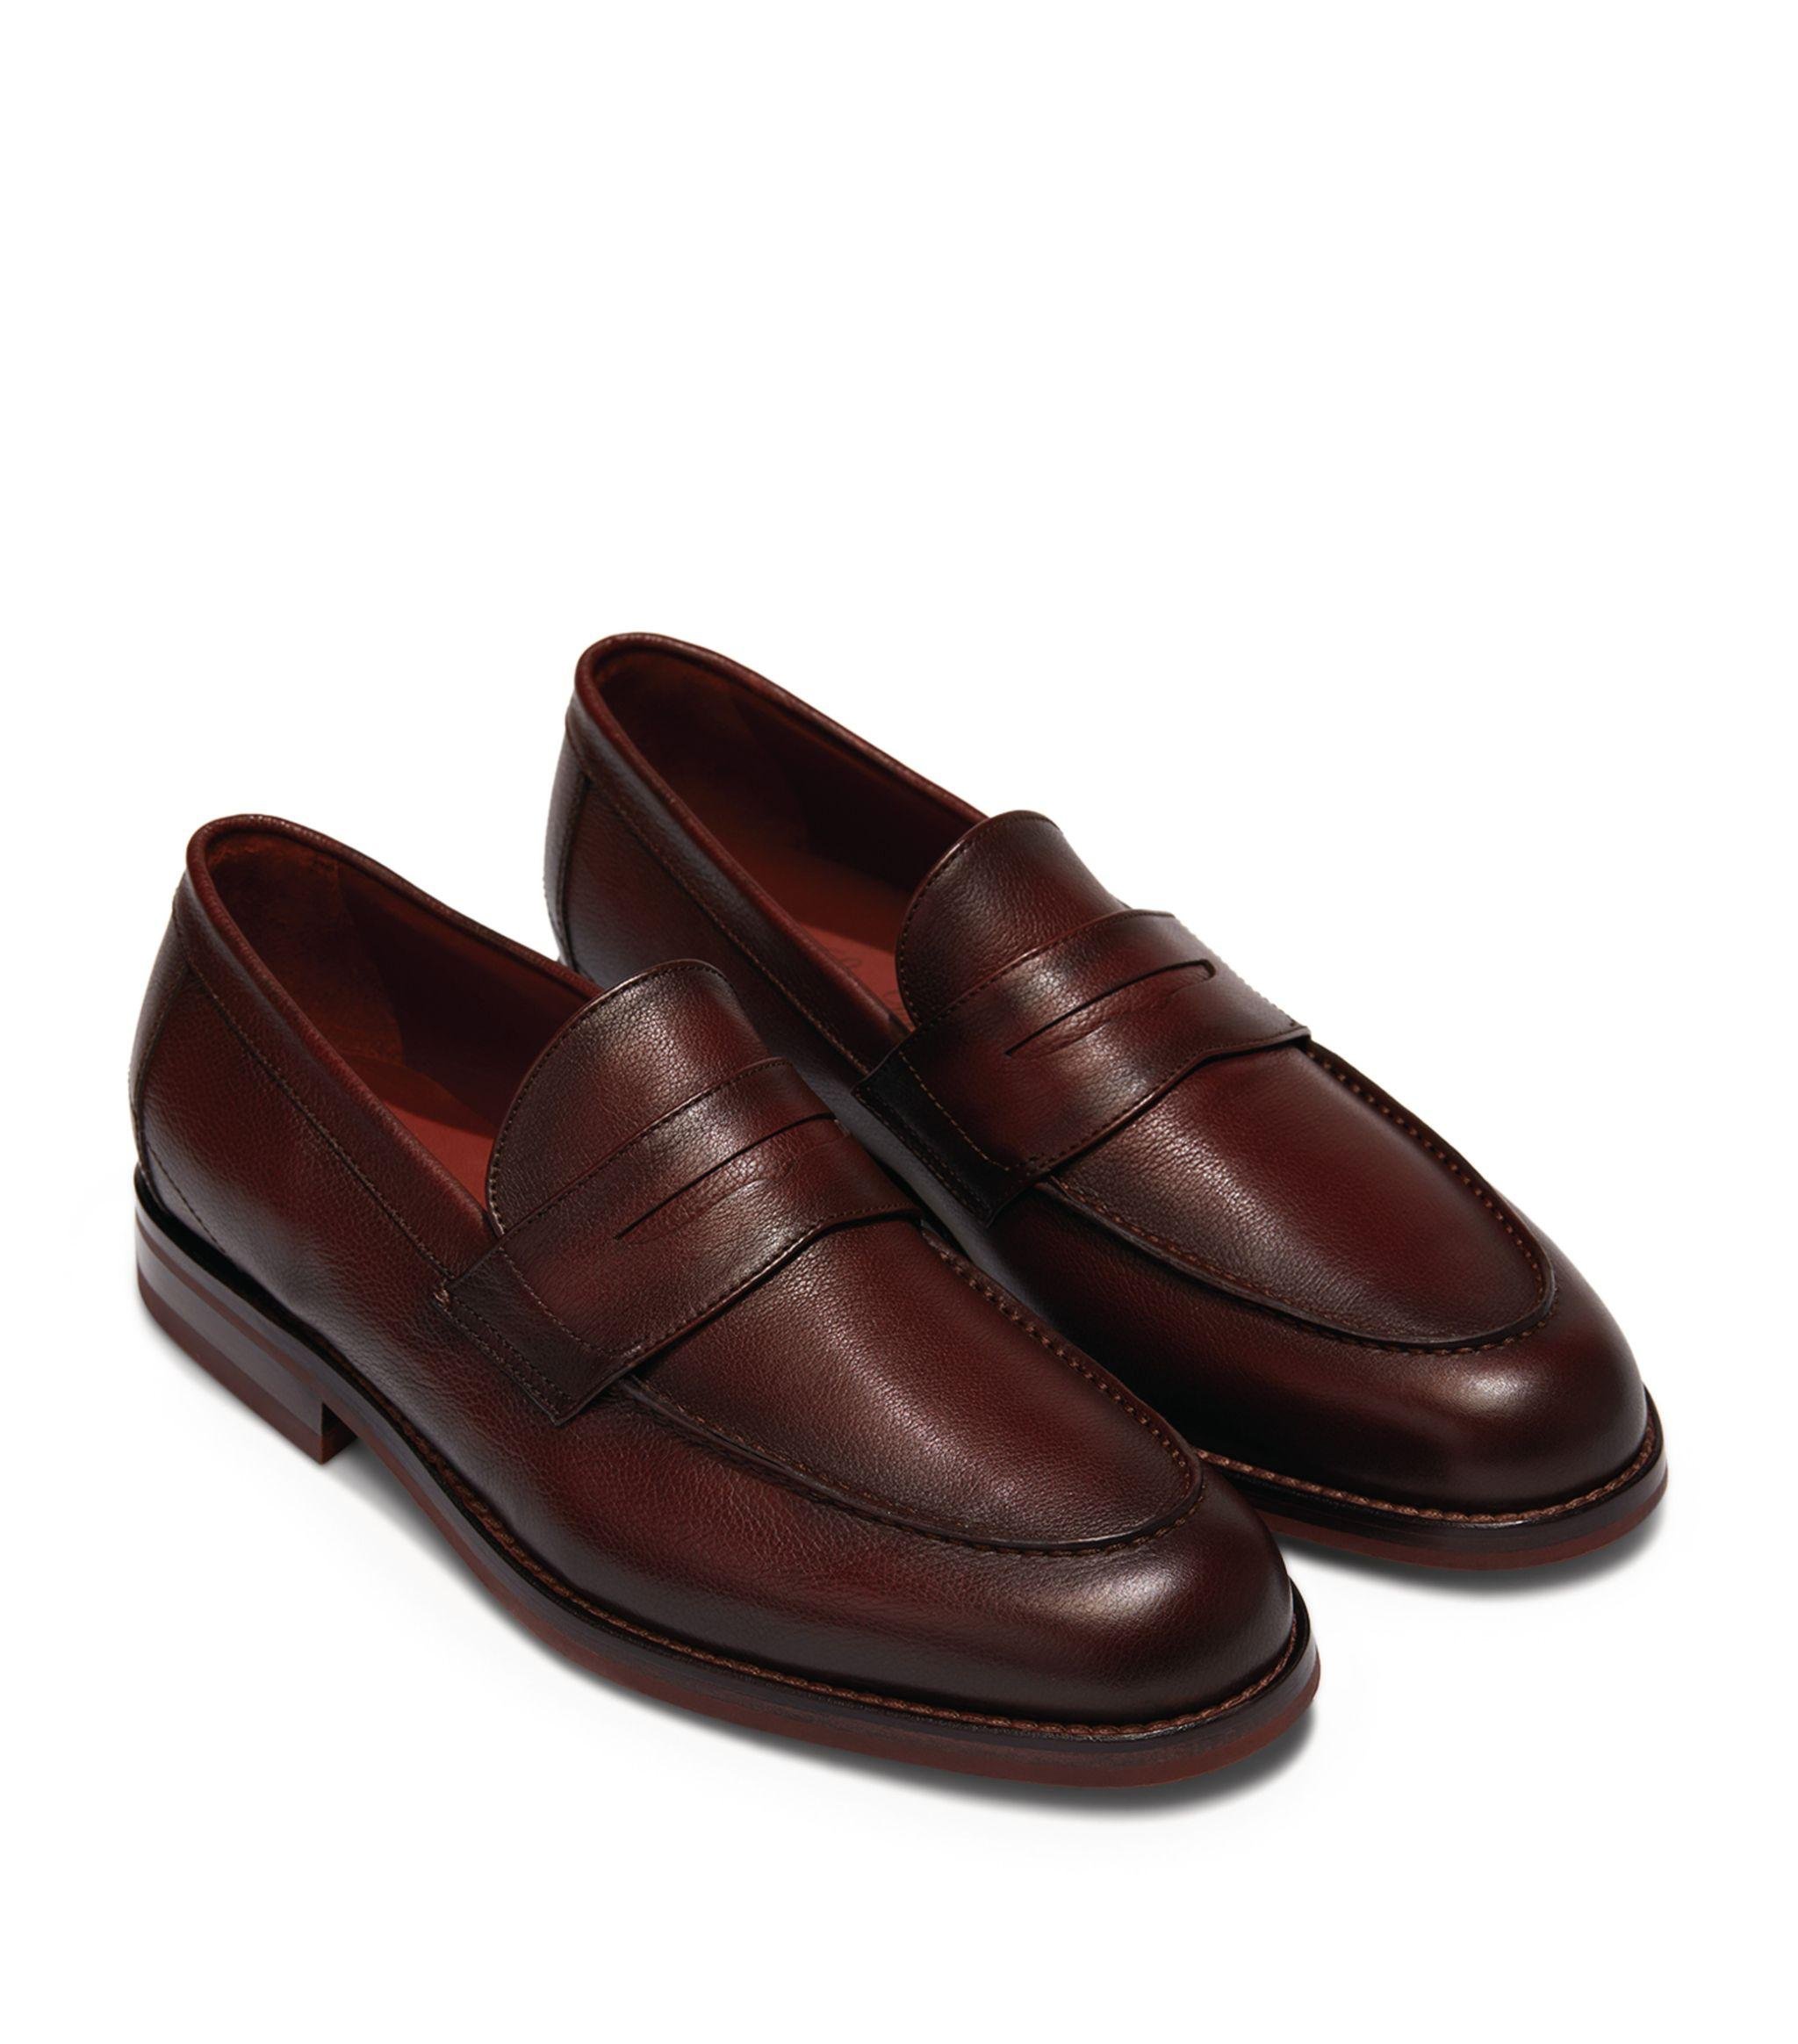 Loro Piana Leather Lp City Walk Loafers in Brown for Men - Lyst